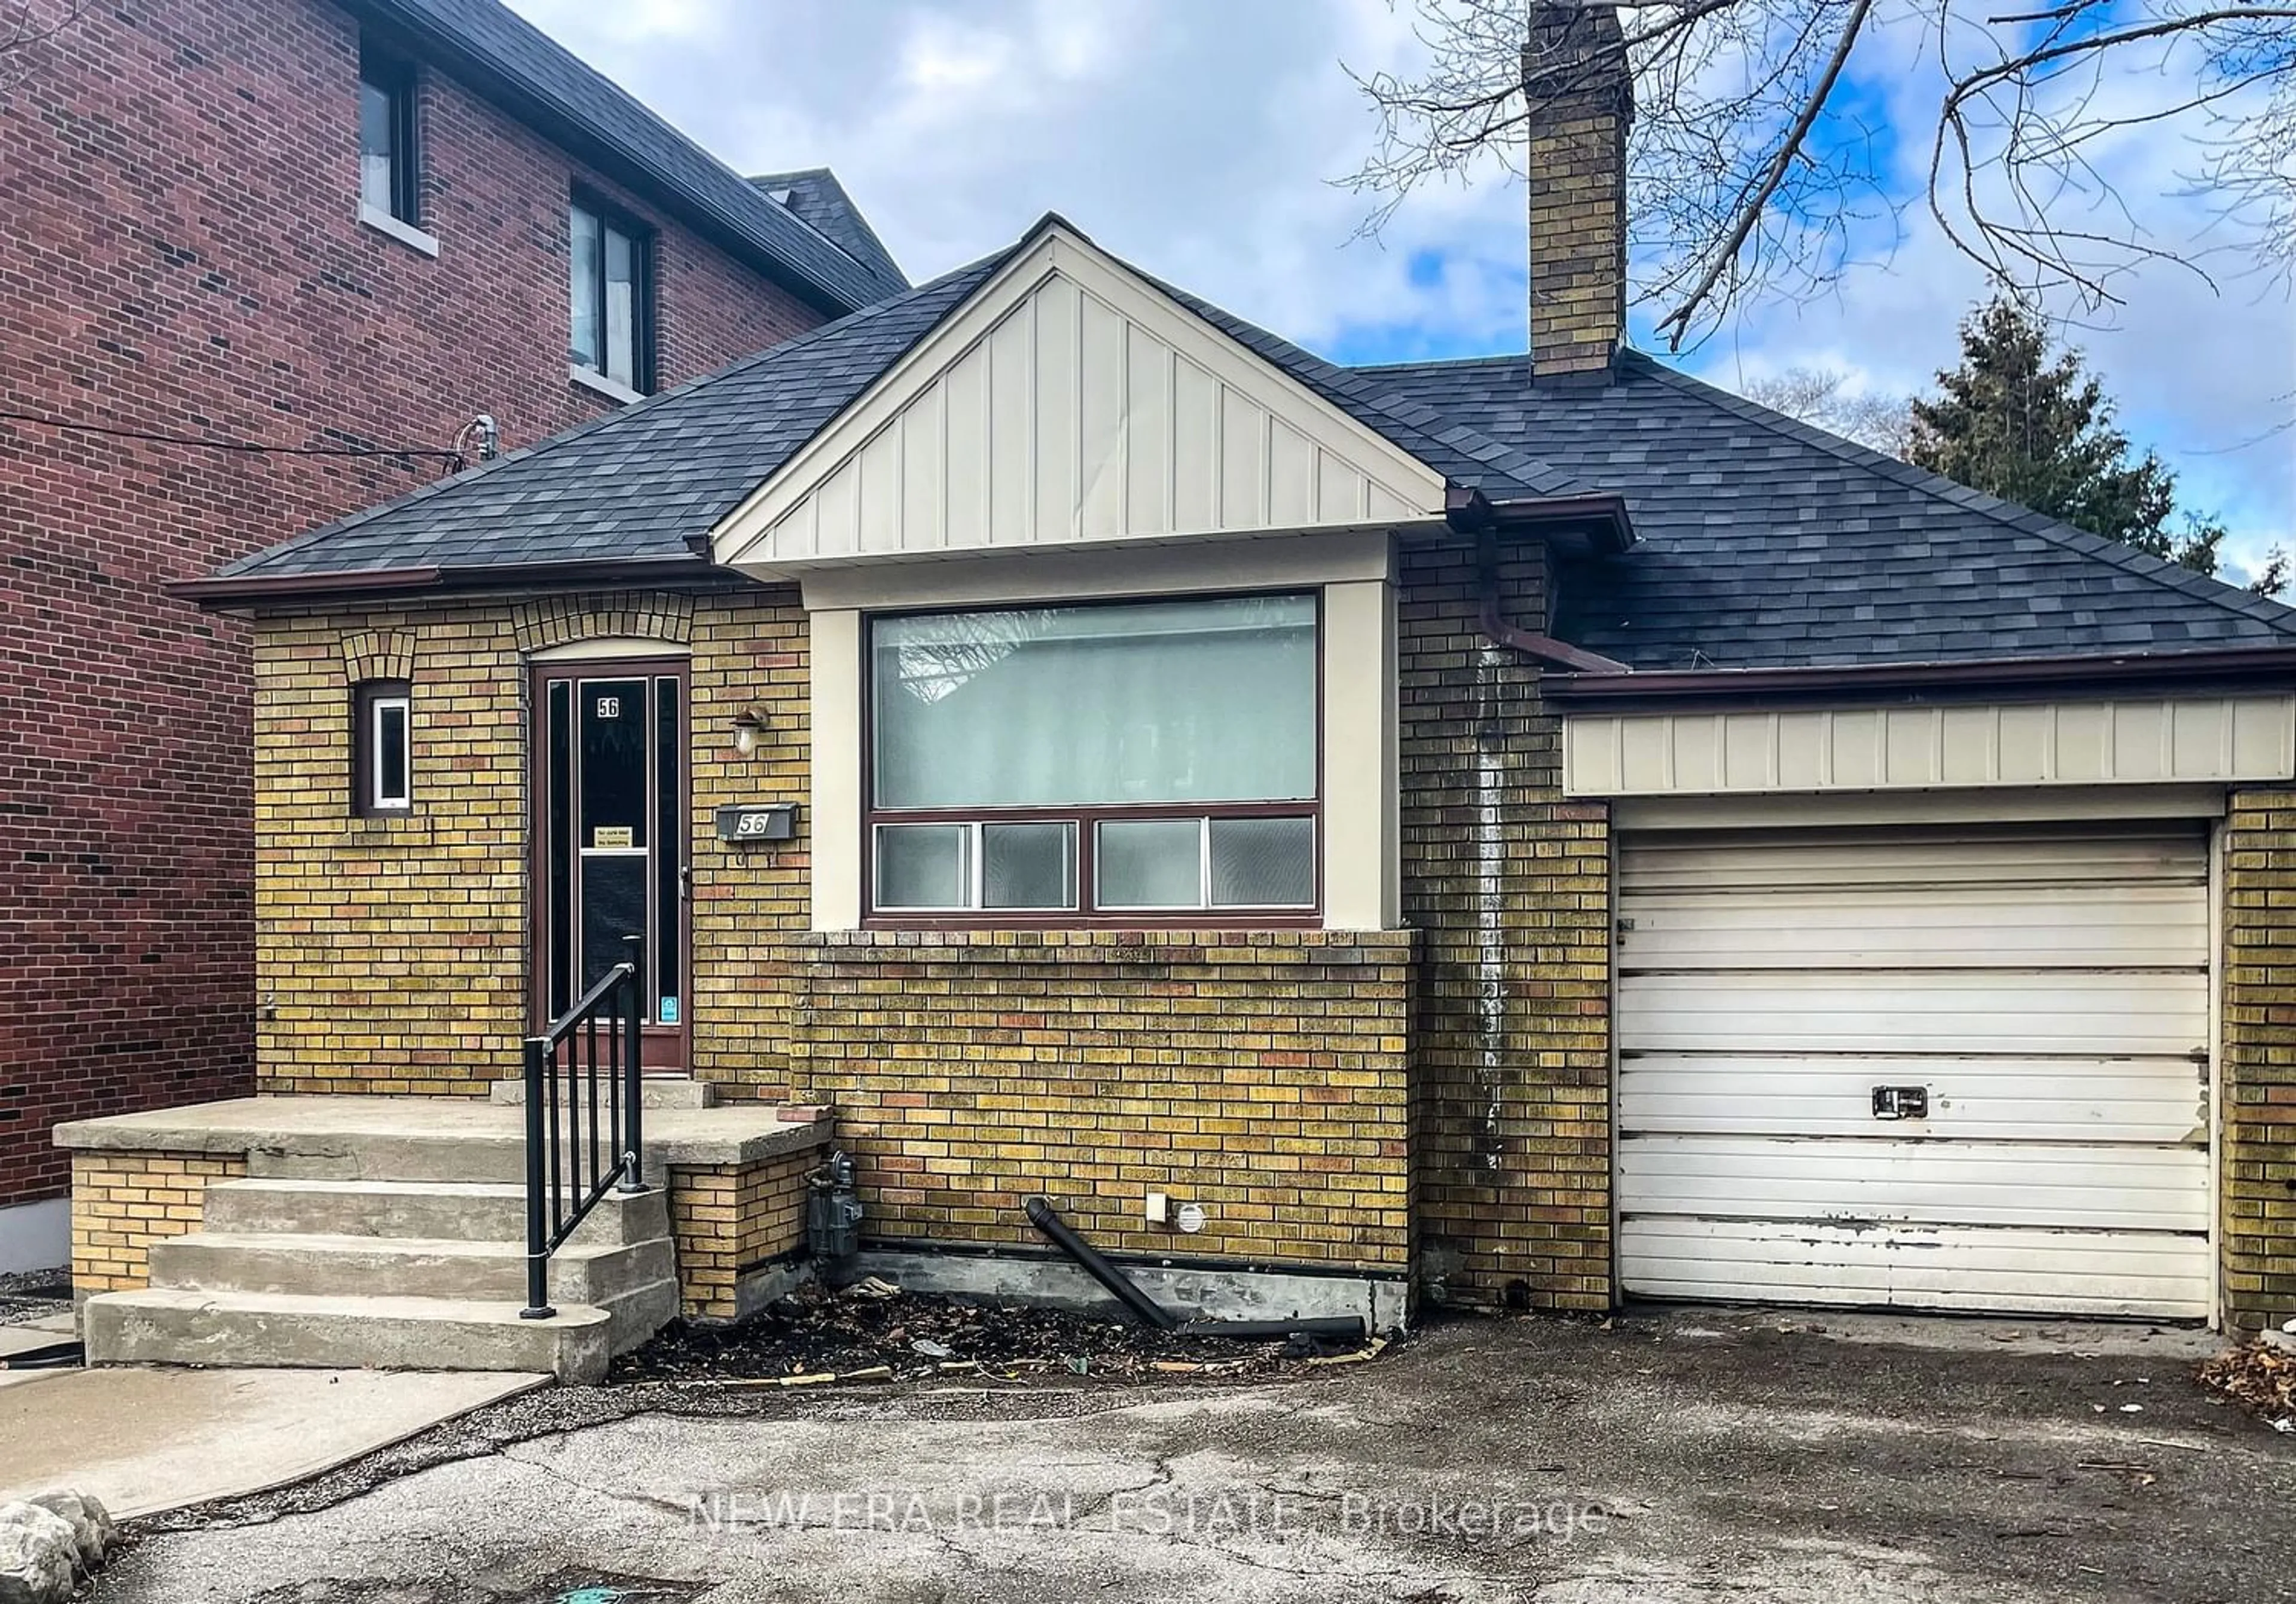 Frontside or backside of a home for 56 Camberwell Rd, Toronto Ontario M6C 3E8